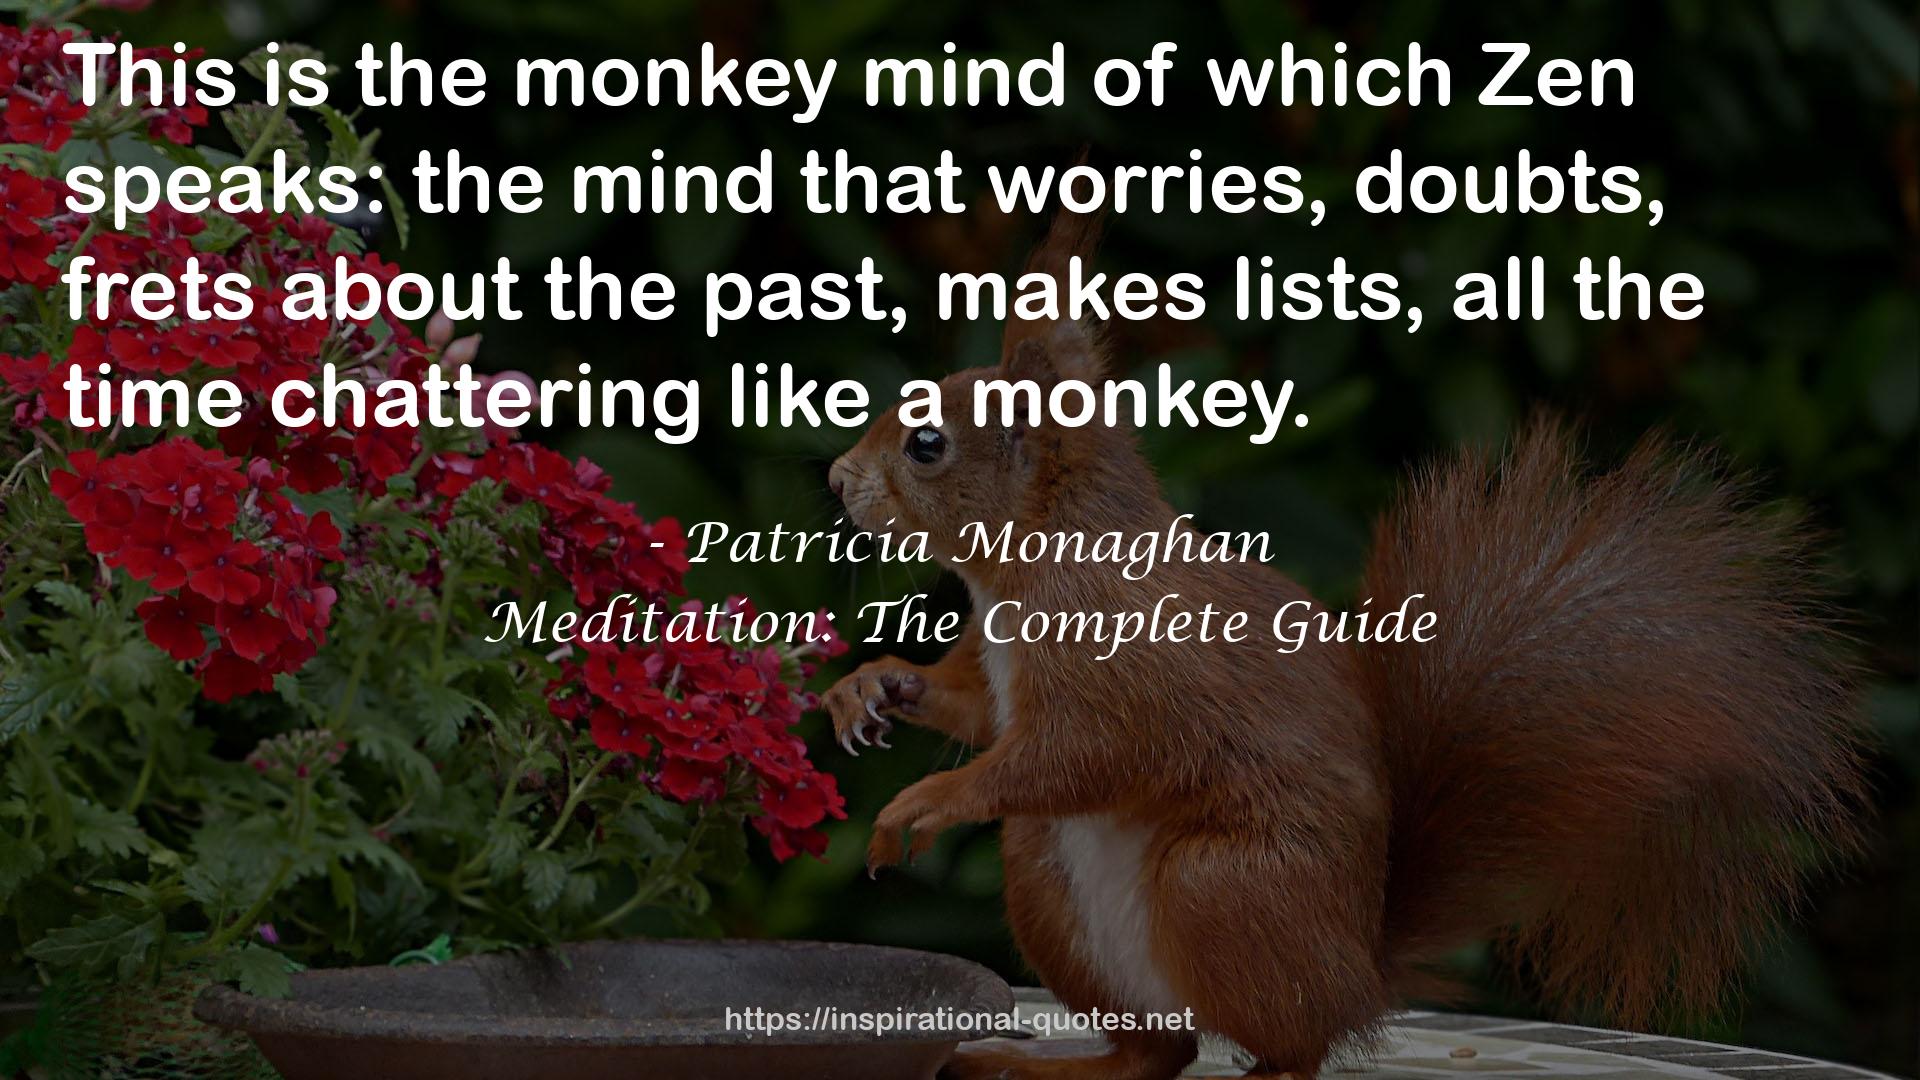 Meditation: The Complete Guide QUOTES